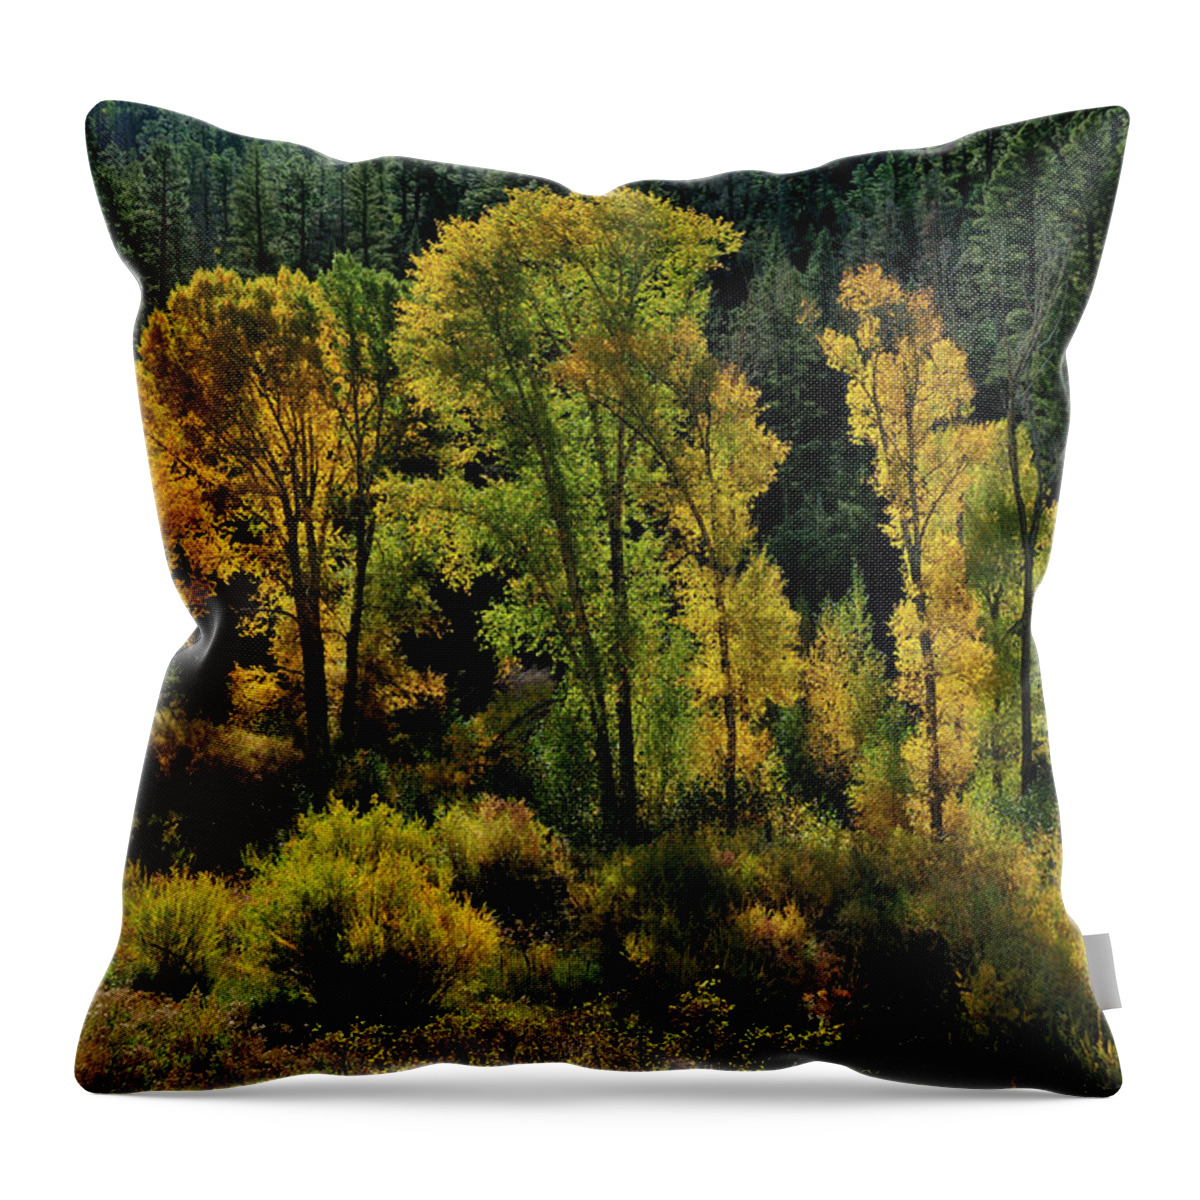 Landscape Throw Pillow featuring the photograph Morning Cottonwoods by Ron Cline